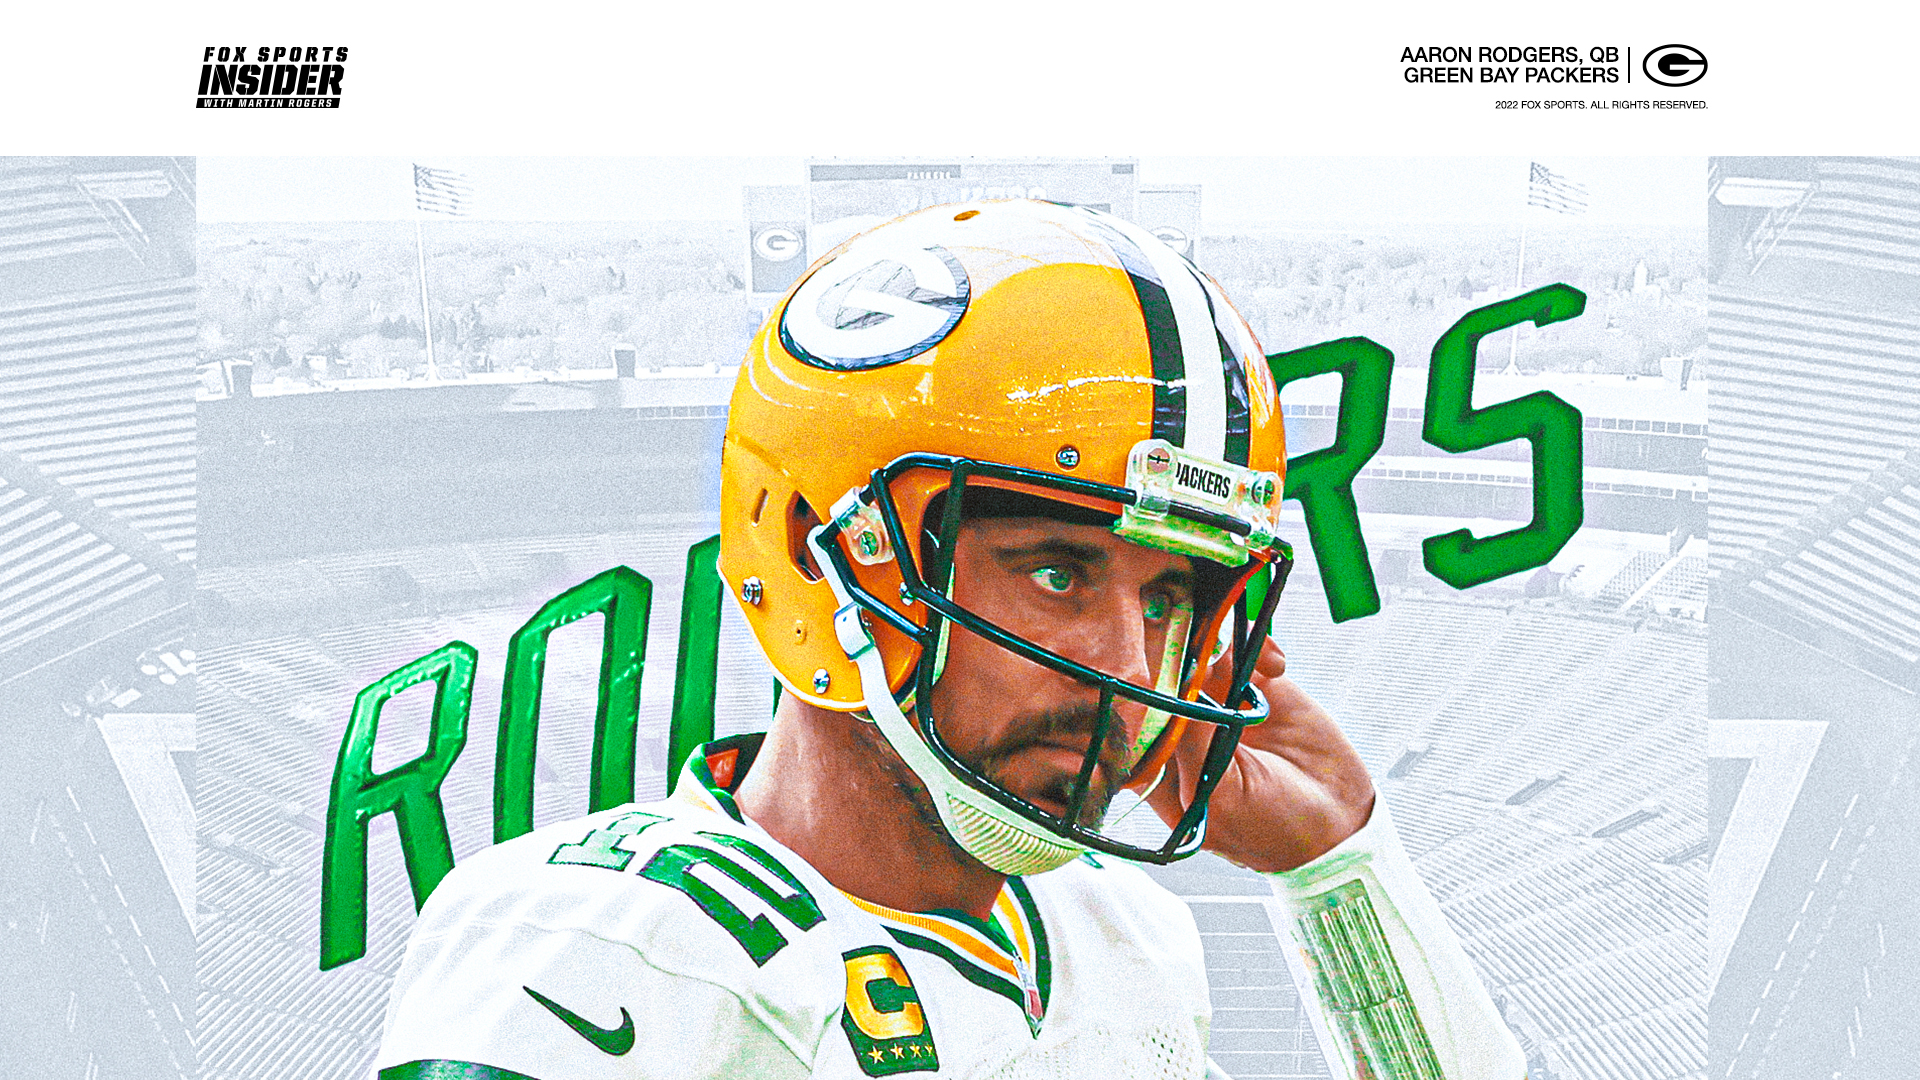 Aaron Rodgers' season will be defined by his patience